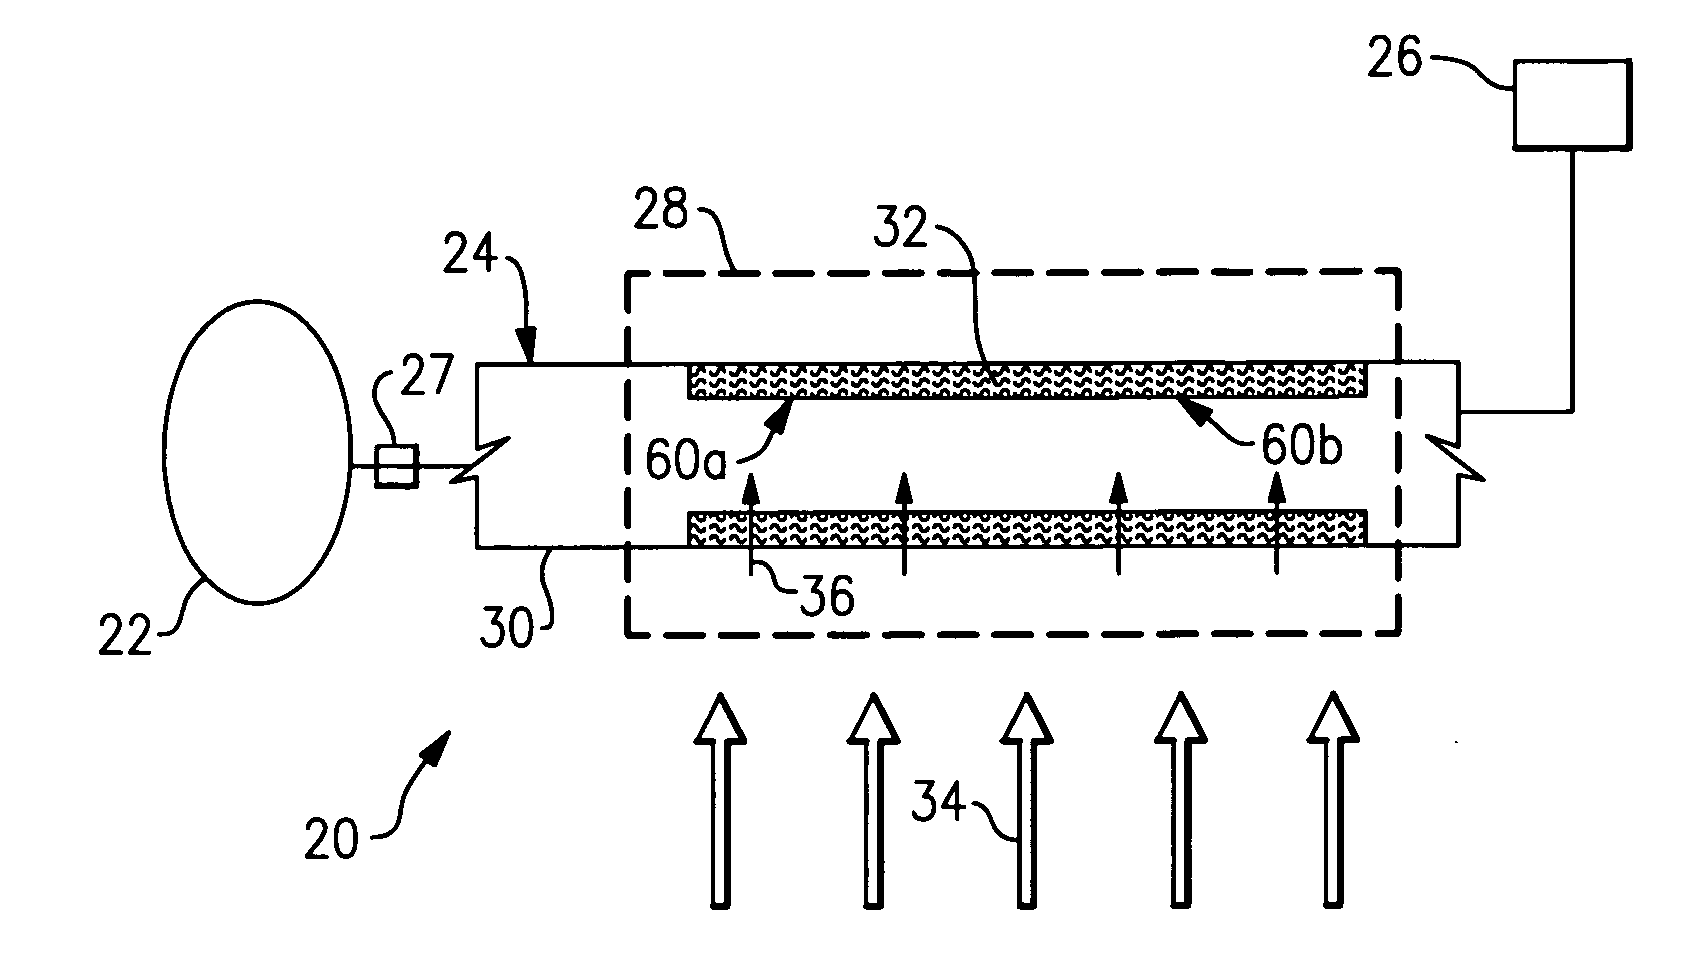 Endothermic cracking aircraft fuel system